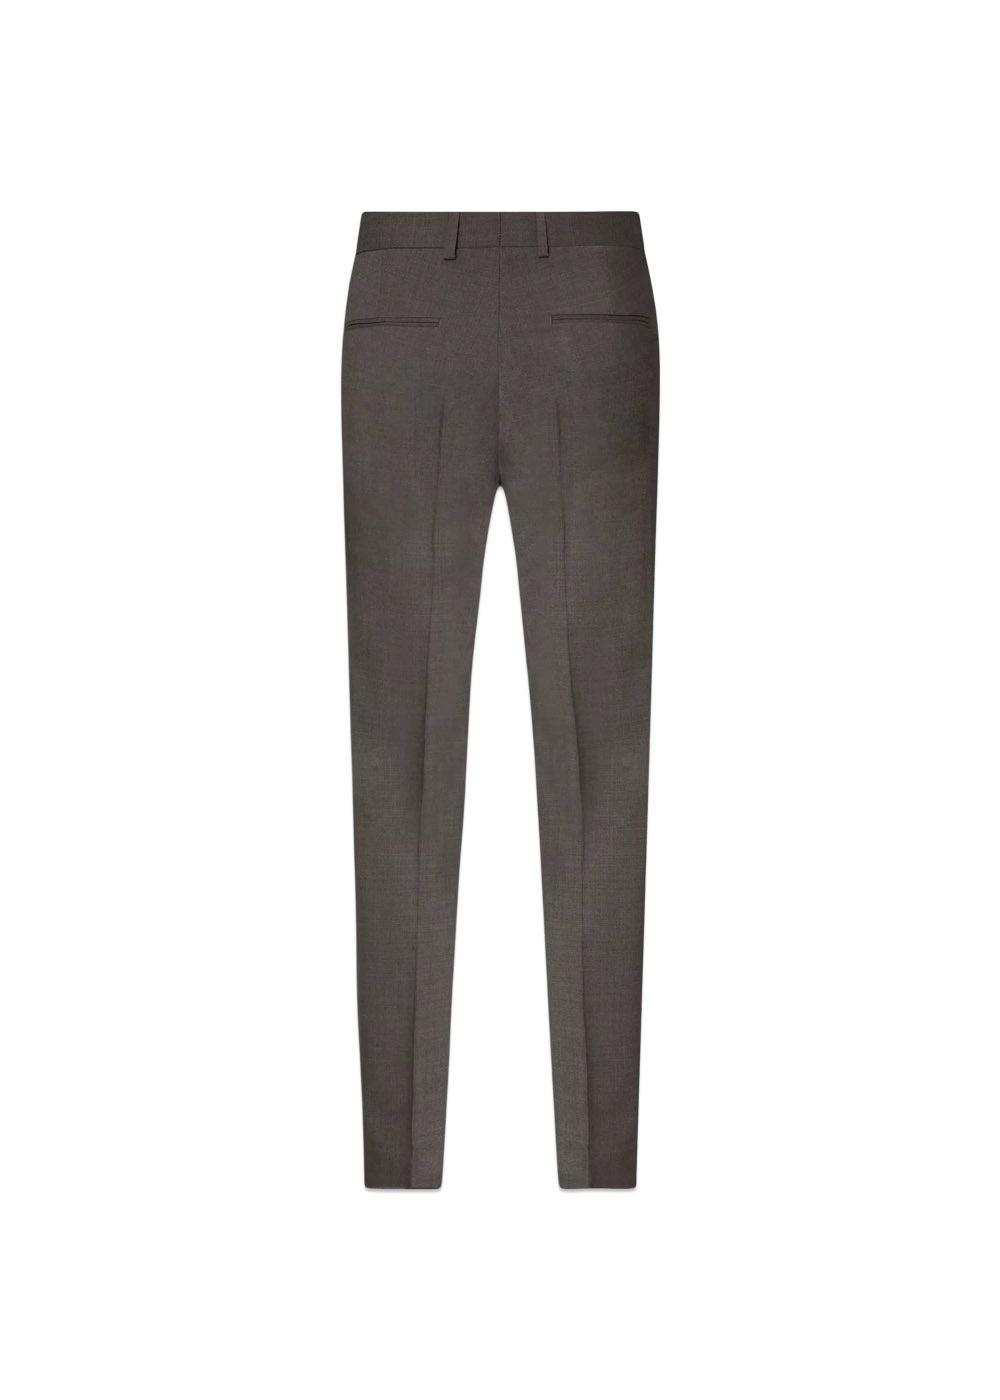 Denz Trousers - Suger Brown